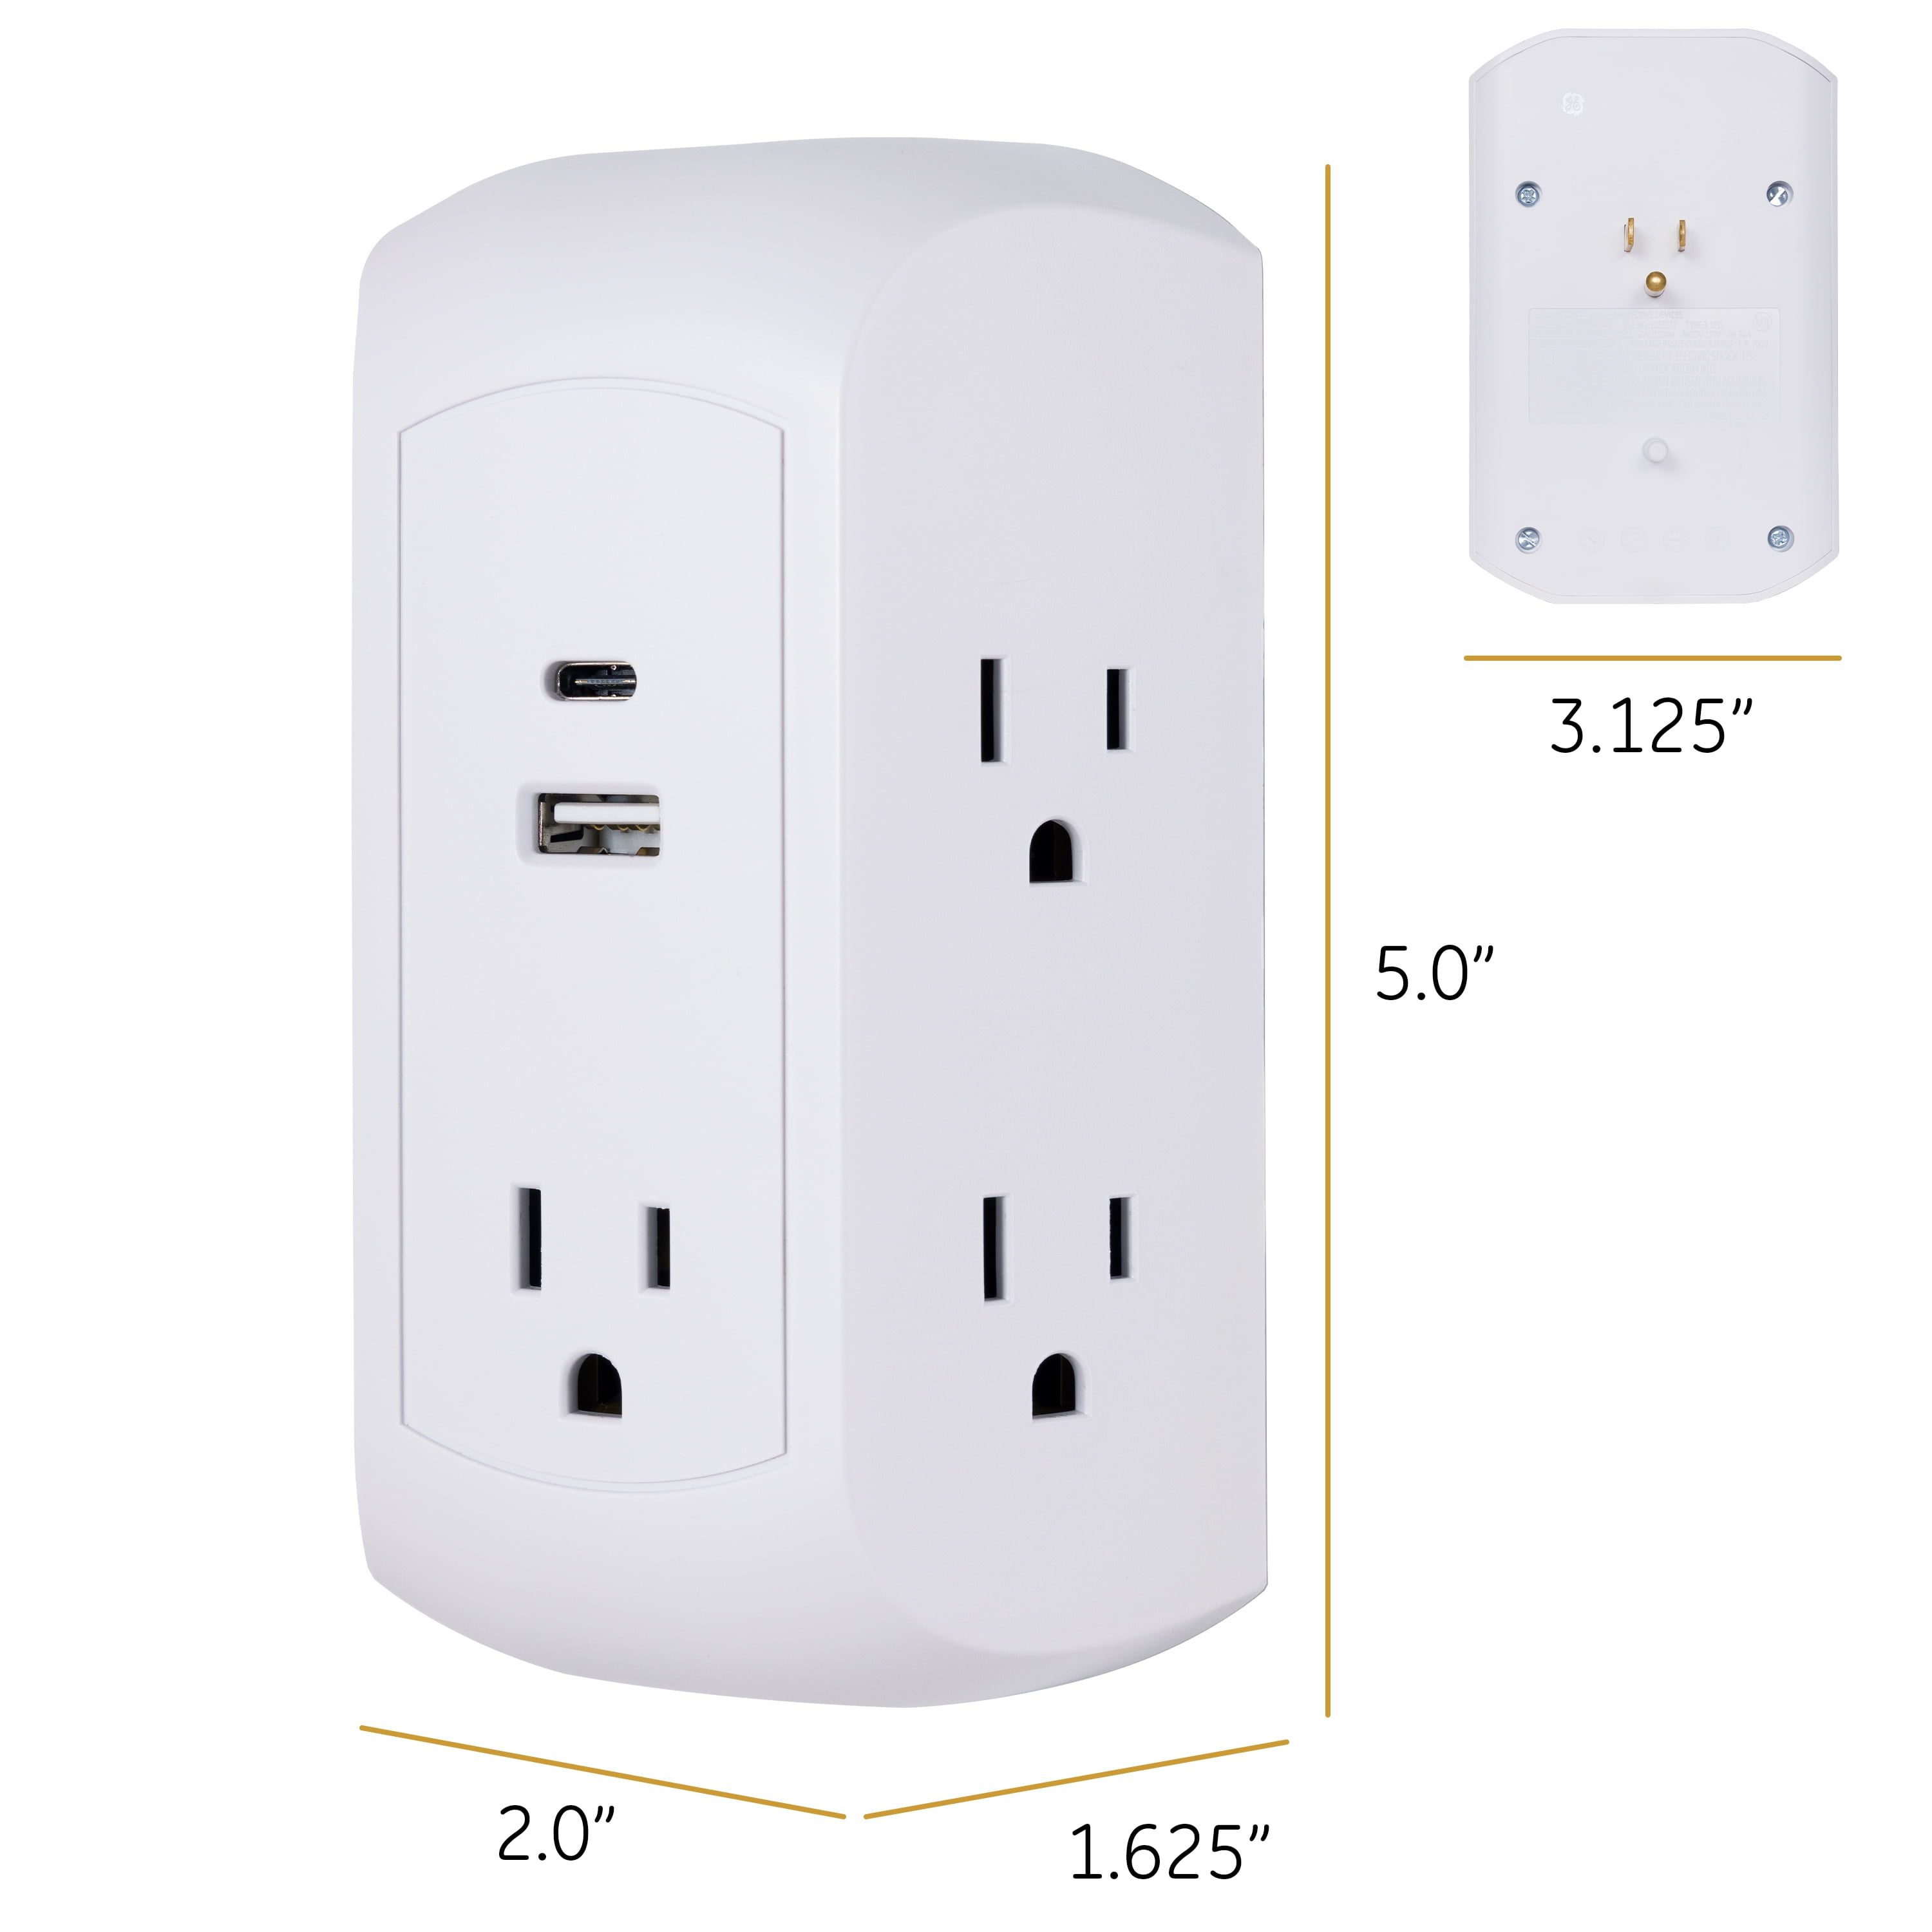 UltraPro-Plug-In-2-Outlet-WiFi-Smart-Switch-2 Pack-White